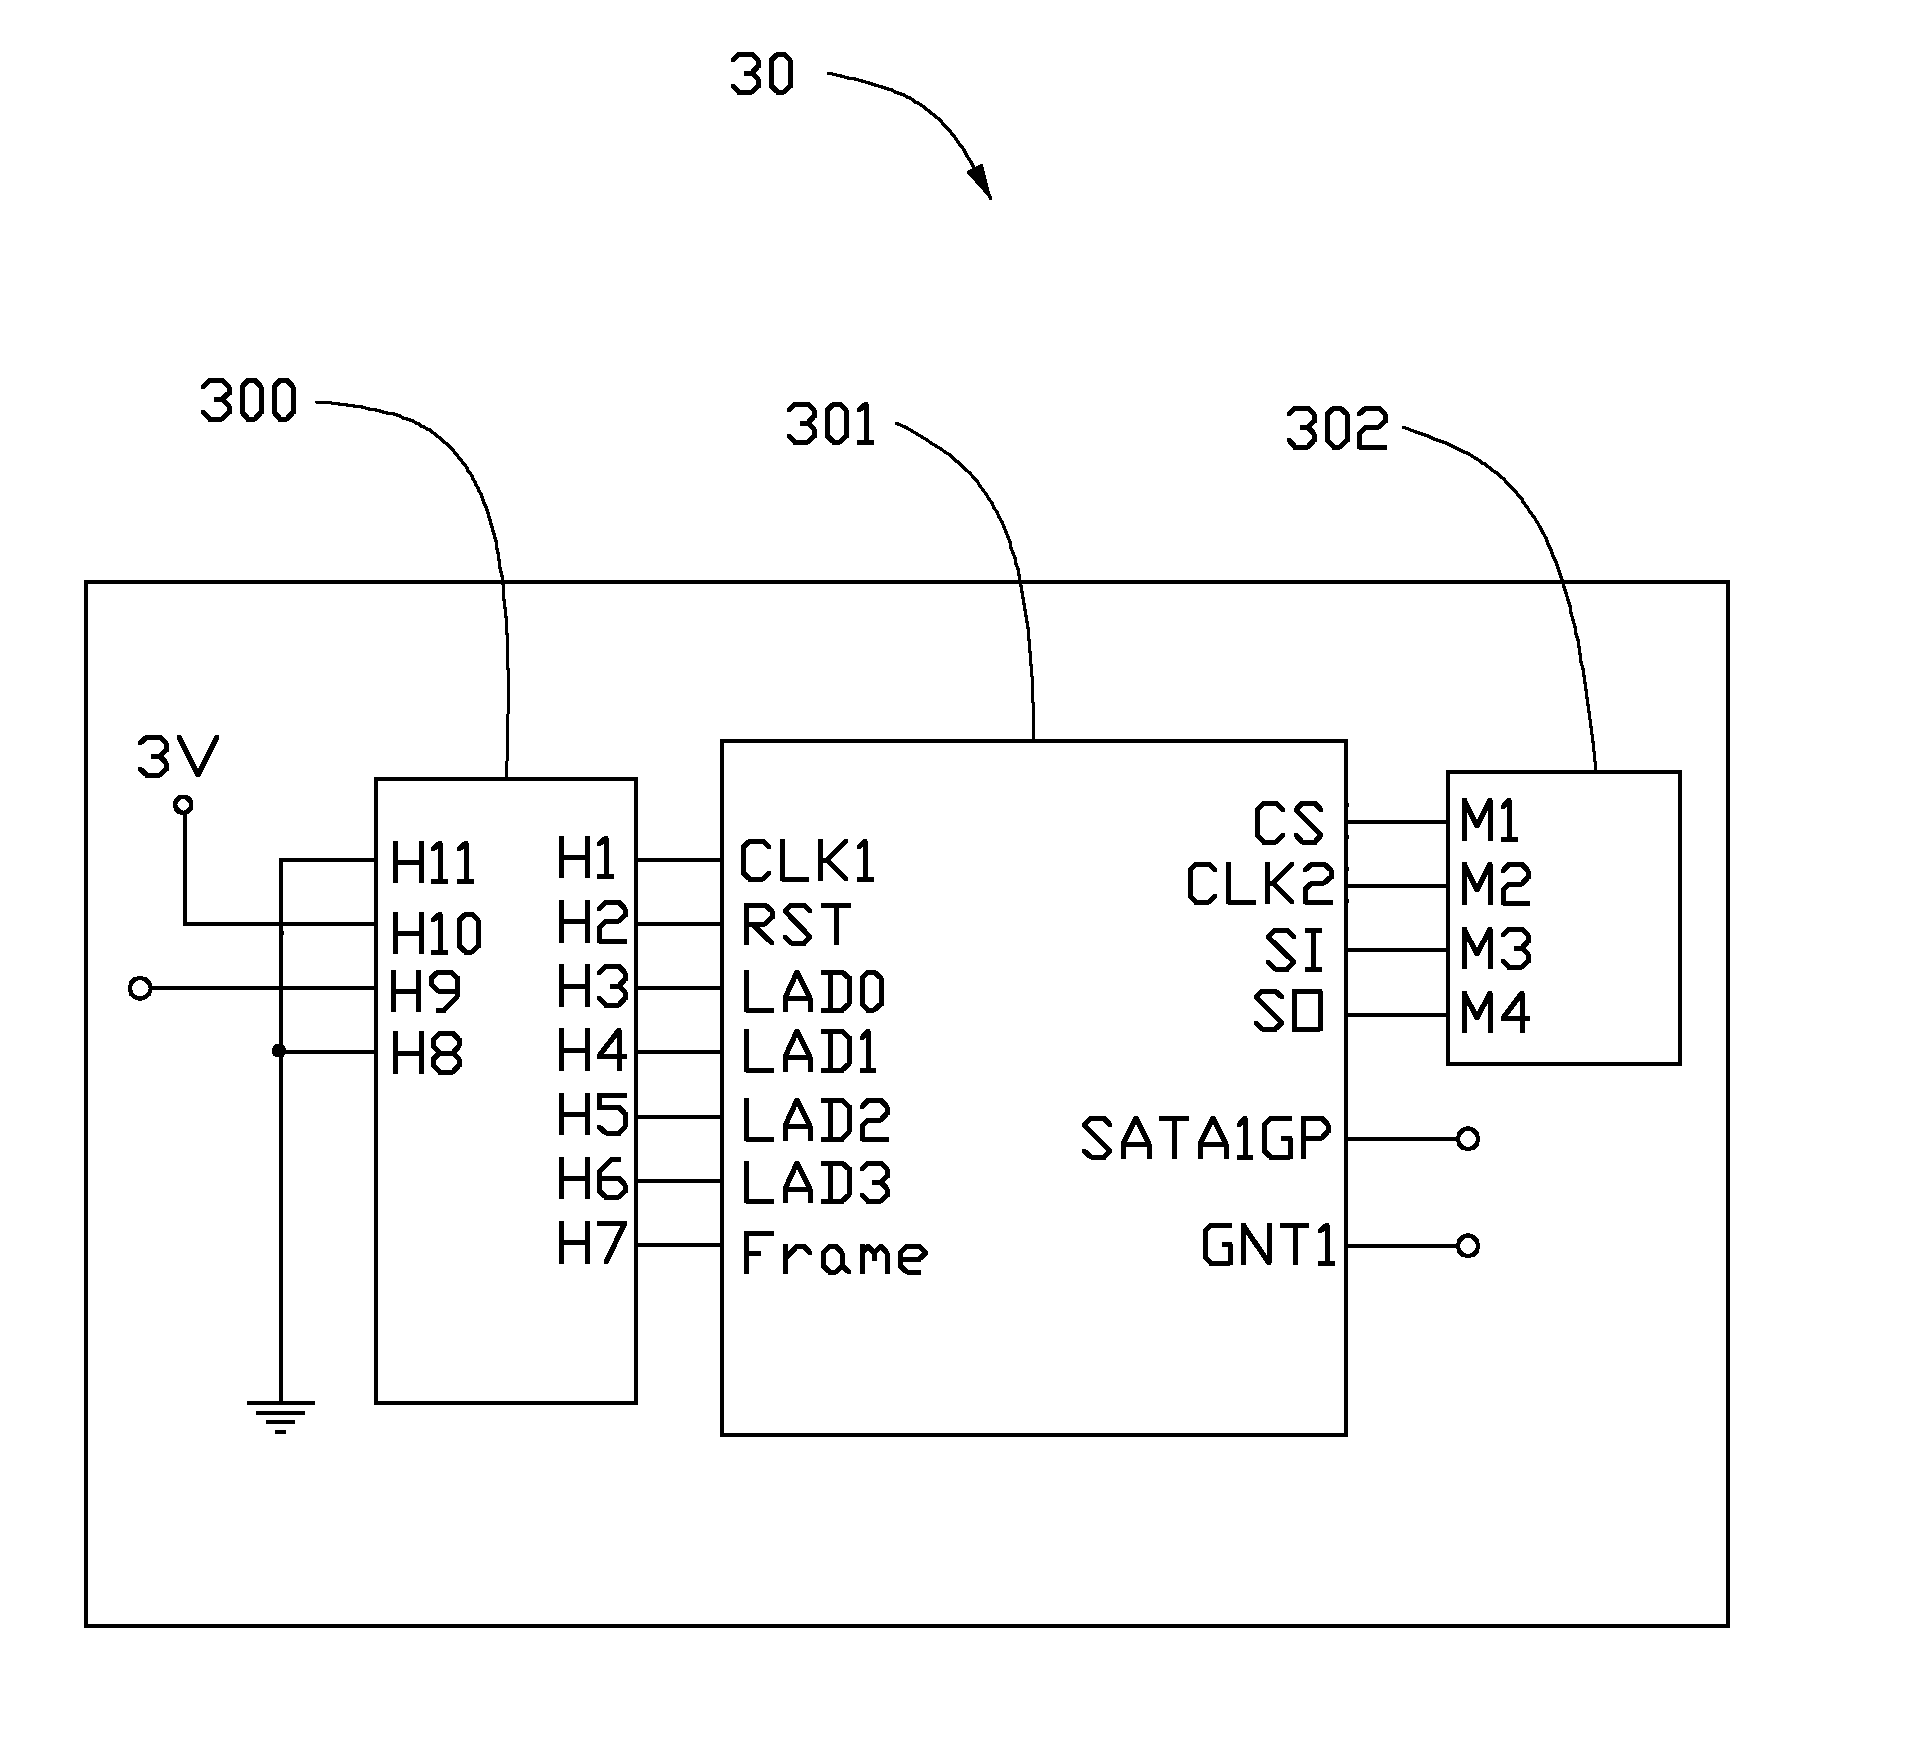 Switch apparatus switching between basic input output system chip and diagnostic card